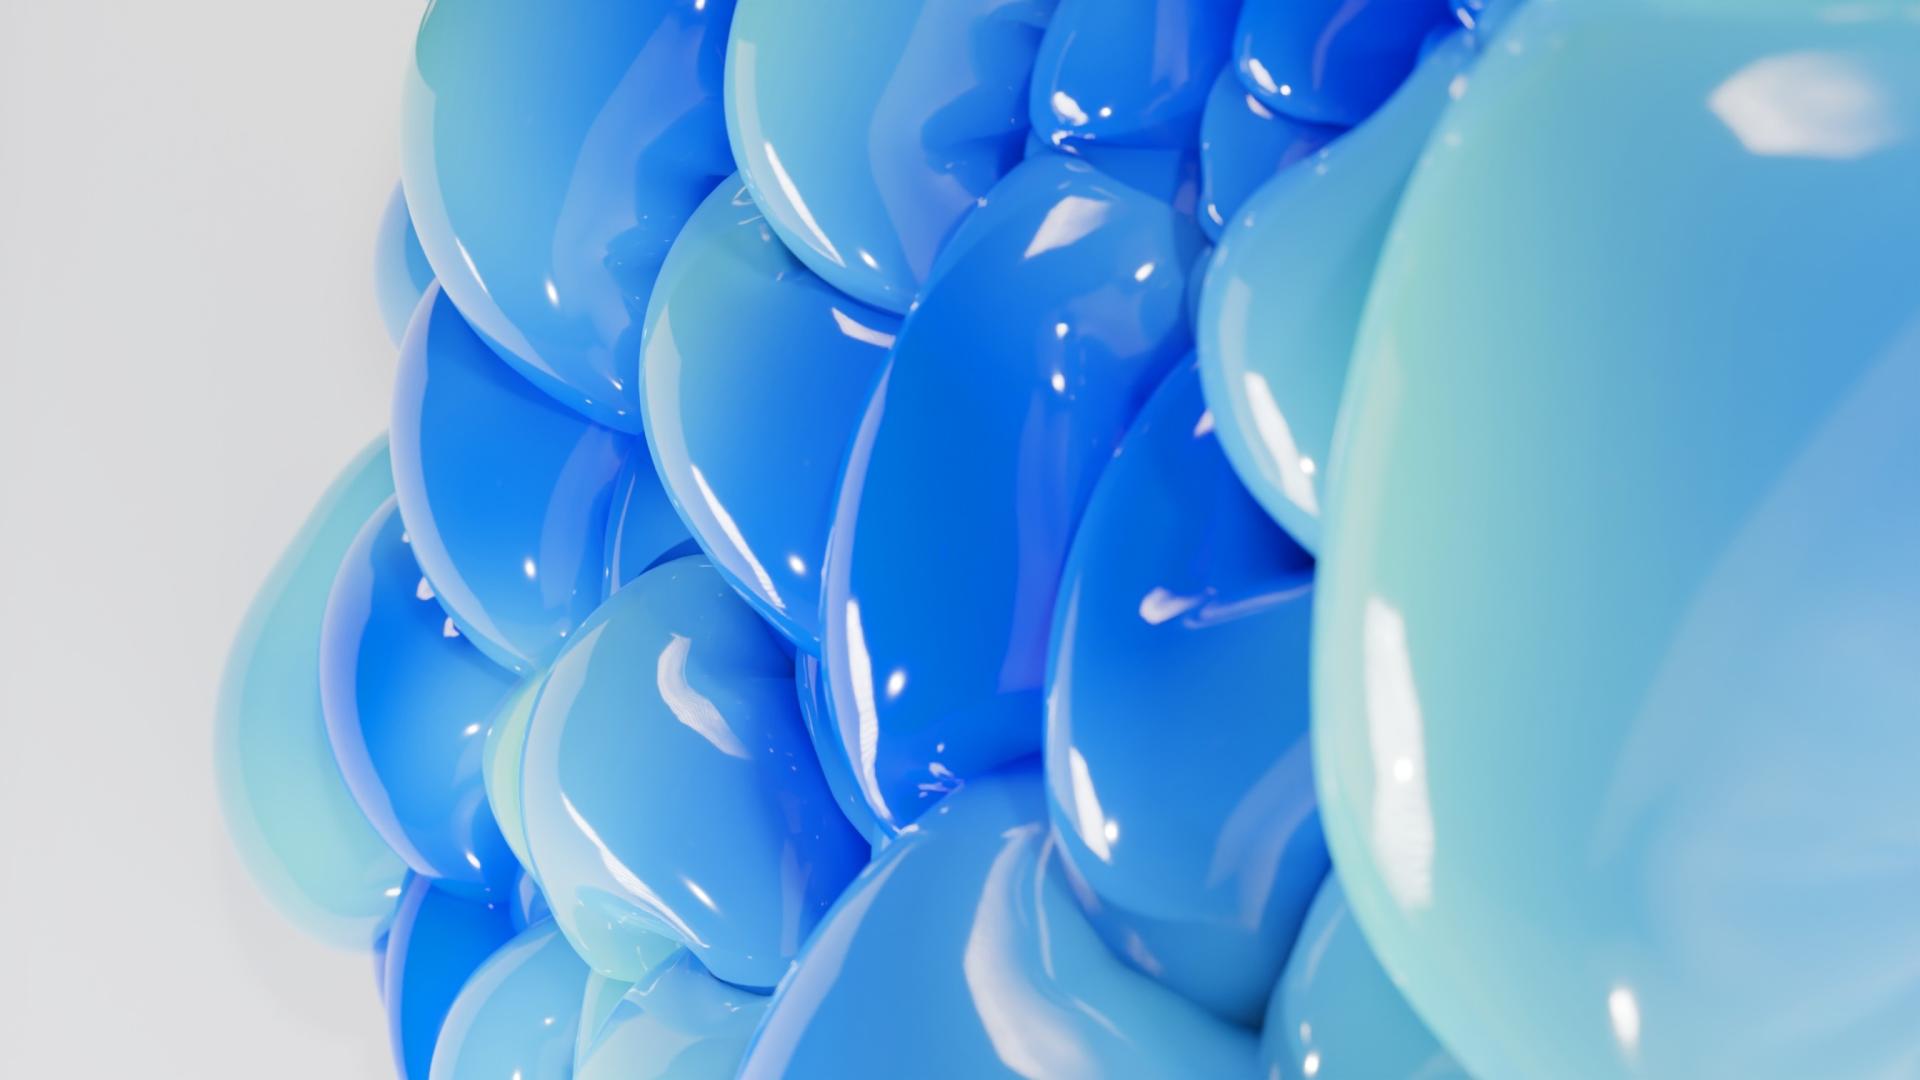 A 3D rendered image depicting the word puffy by Iya Mistry at Flying Object